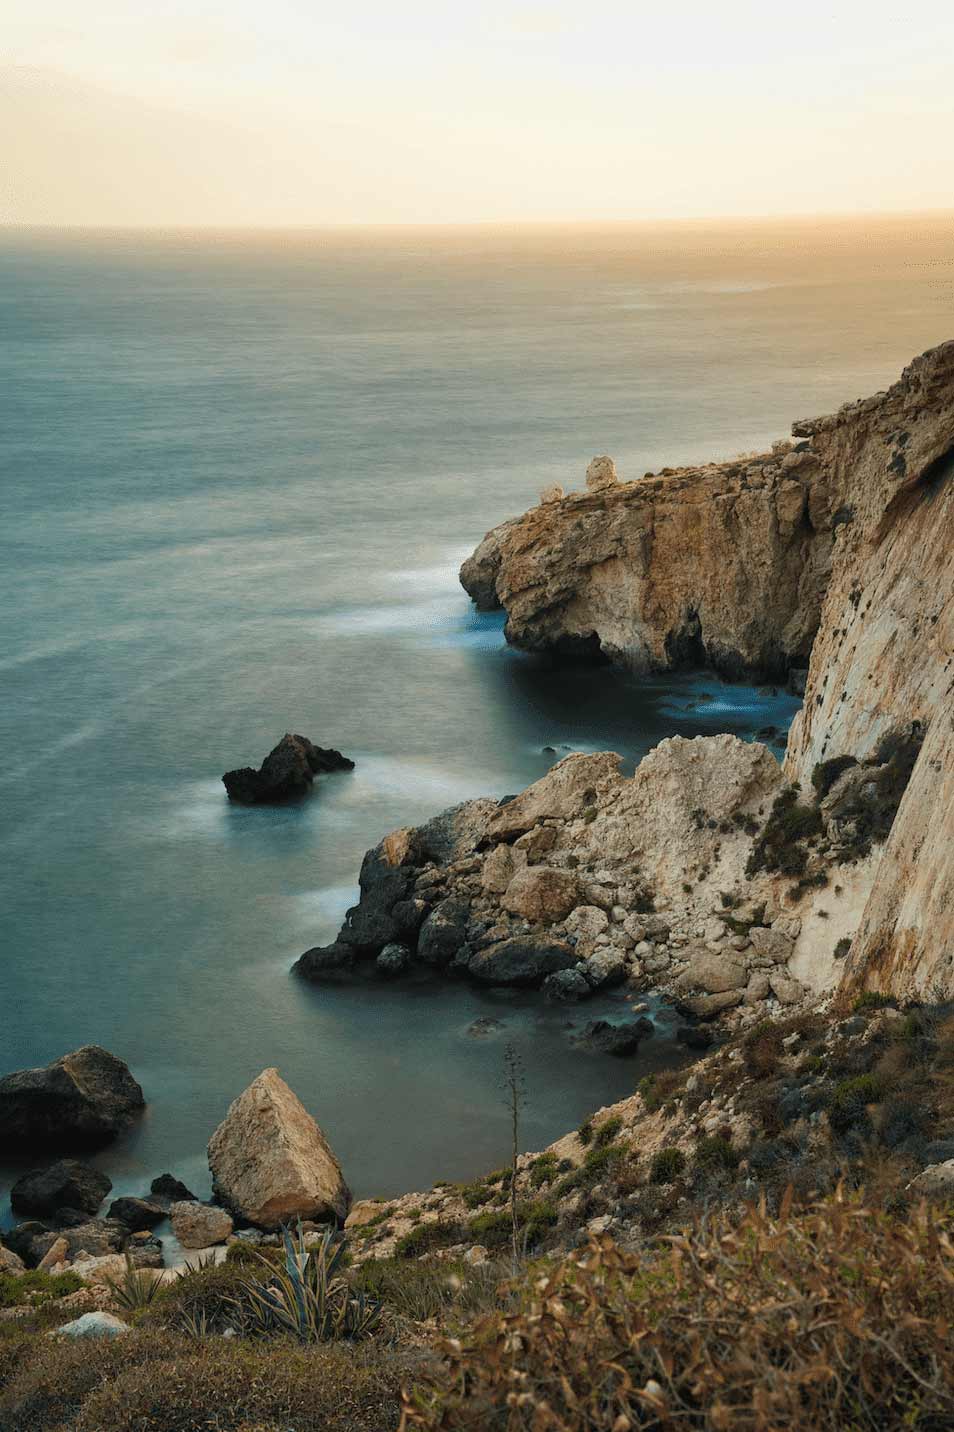 cliffs over the ocean at sunset